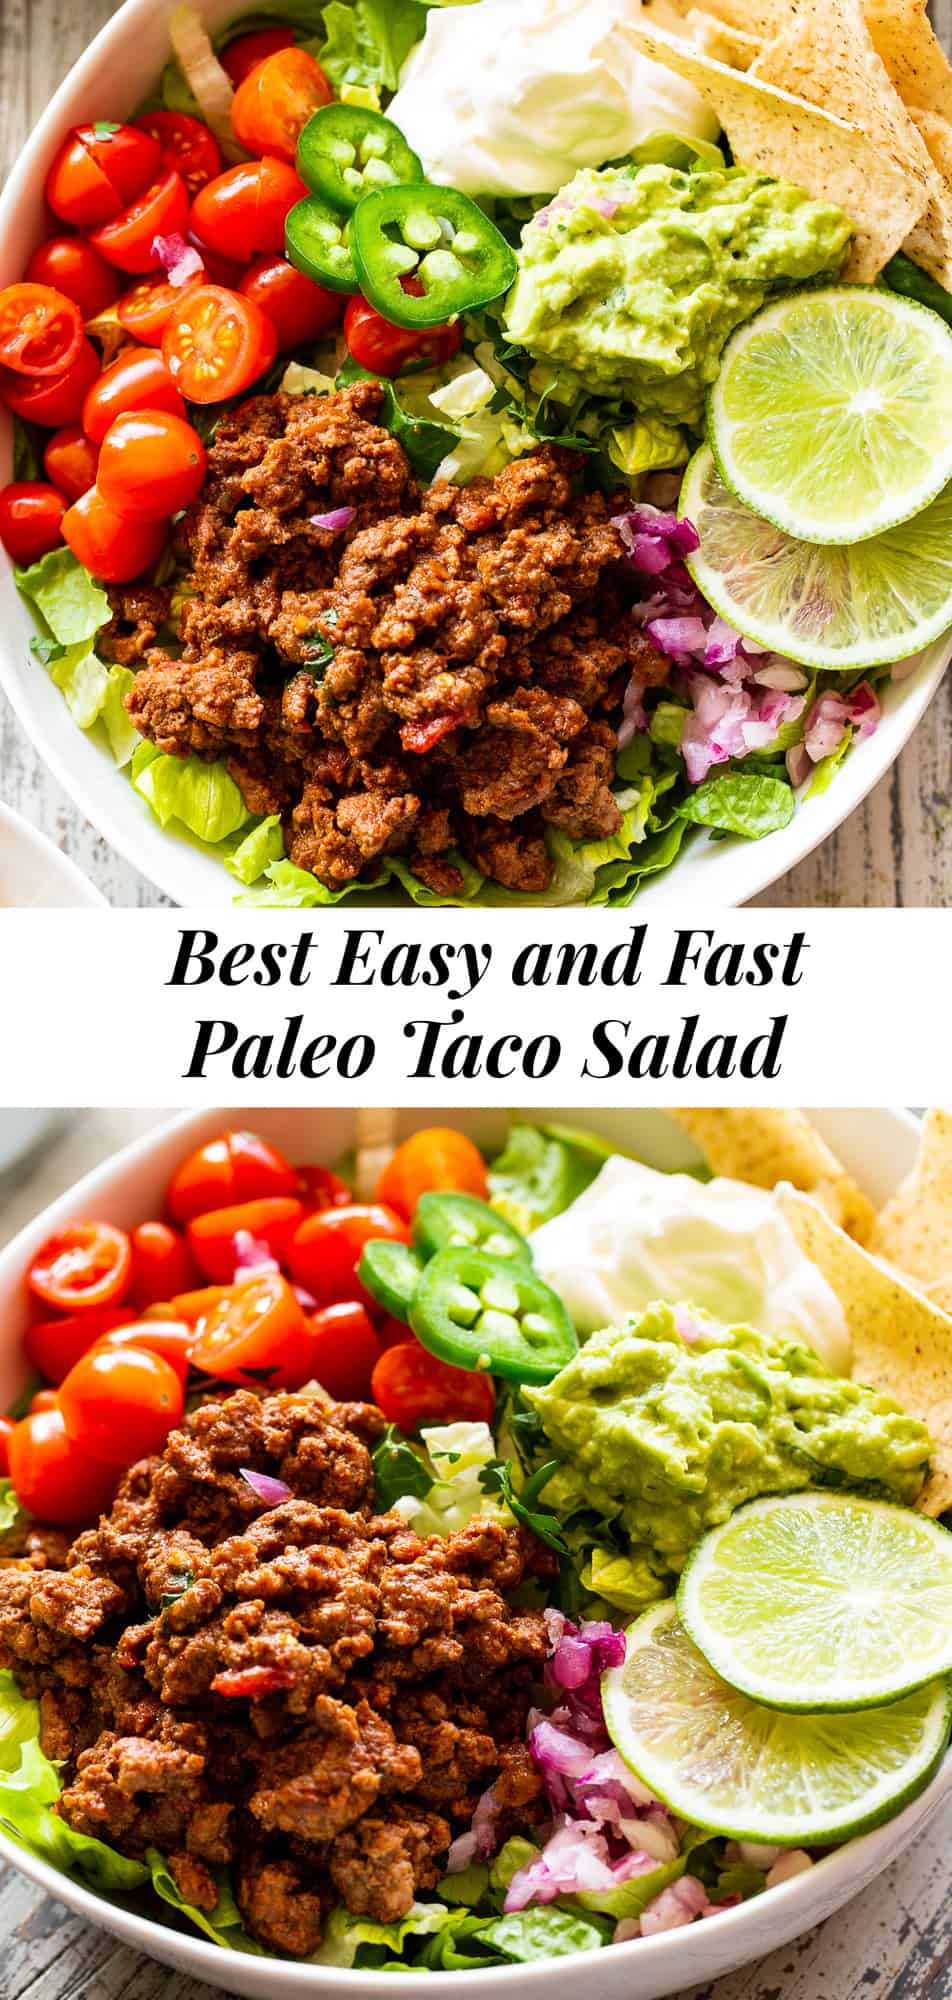 This easy, flavor packed paleo taco salad is ready in 20 minutes from start to finish and great for an easy weeknight dinner! Whole30 and keto options. #paleo #whole30 #keto #cleaneating 